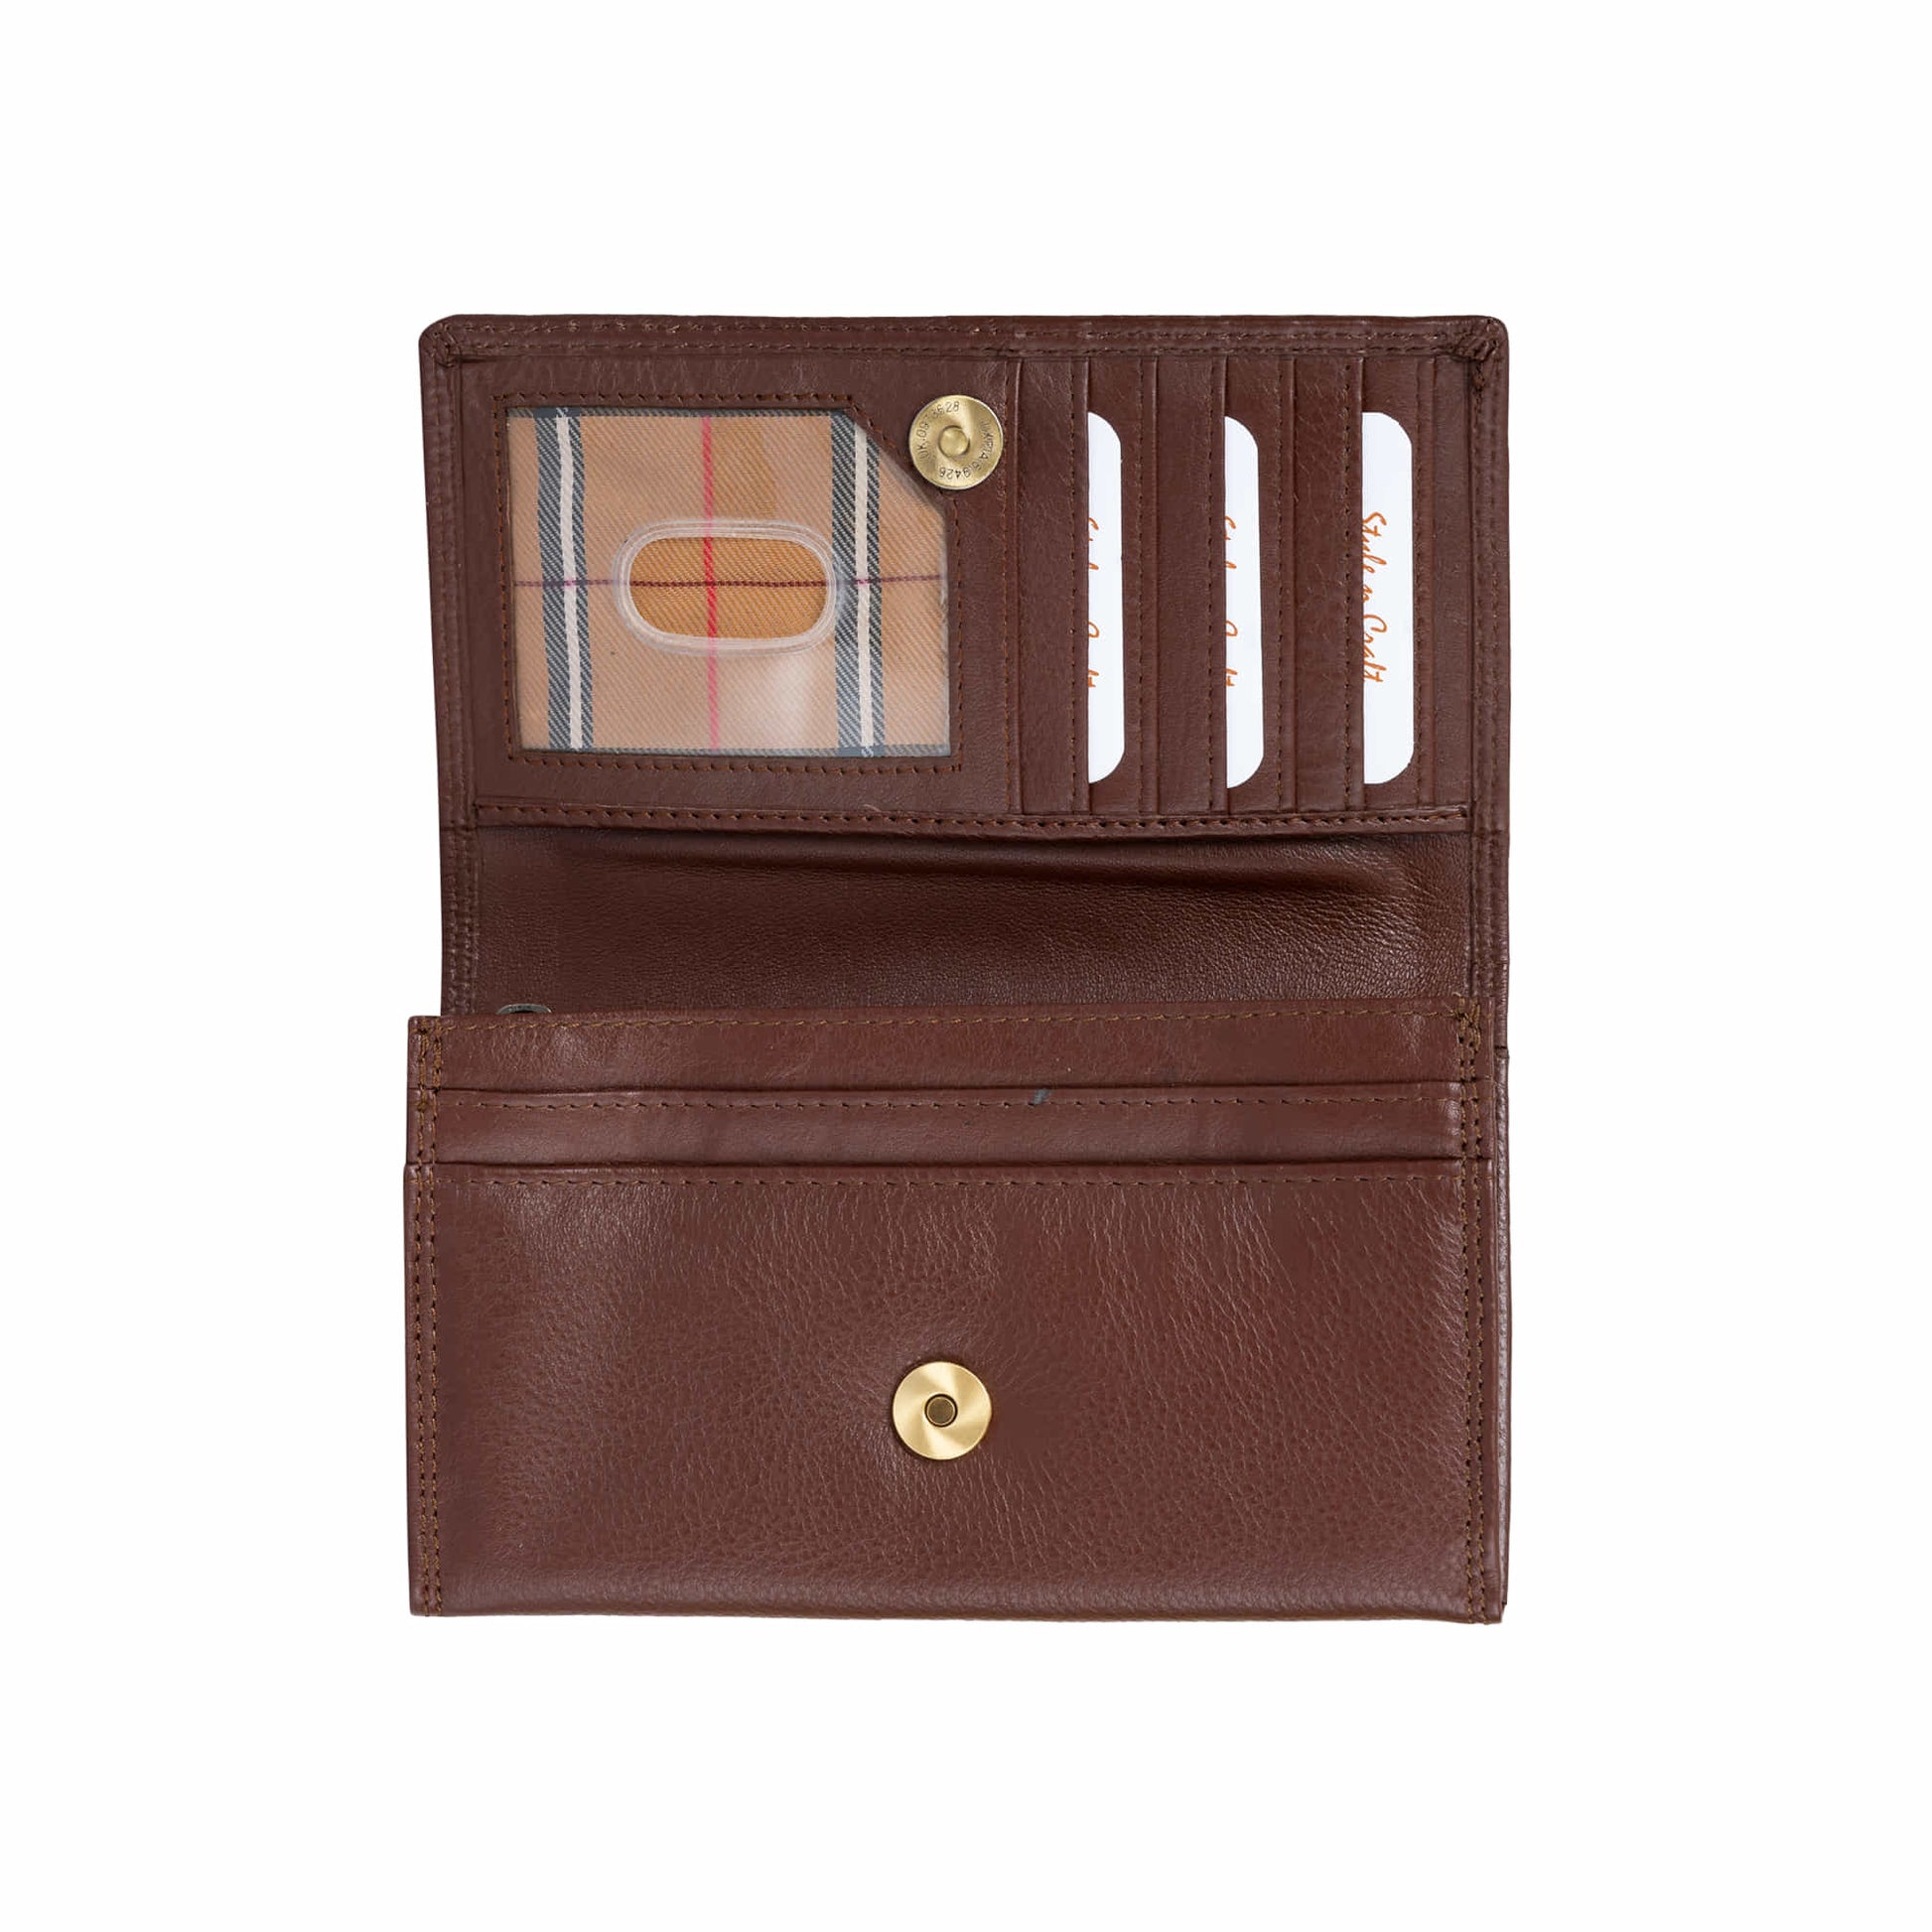 Style n Craft 391102 Ladies Clutch Wallet in Brown Full Grain Leather - Open View 1b - Showing the ID Window, Credit Card Pockets & the Magnetic Button for Closing